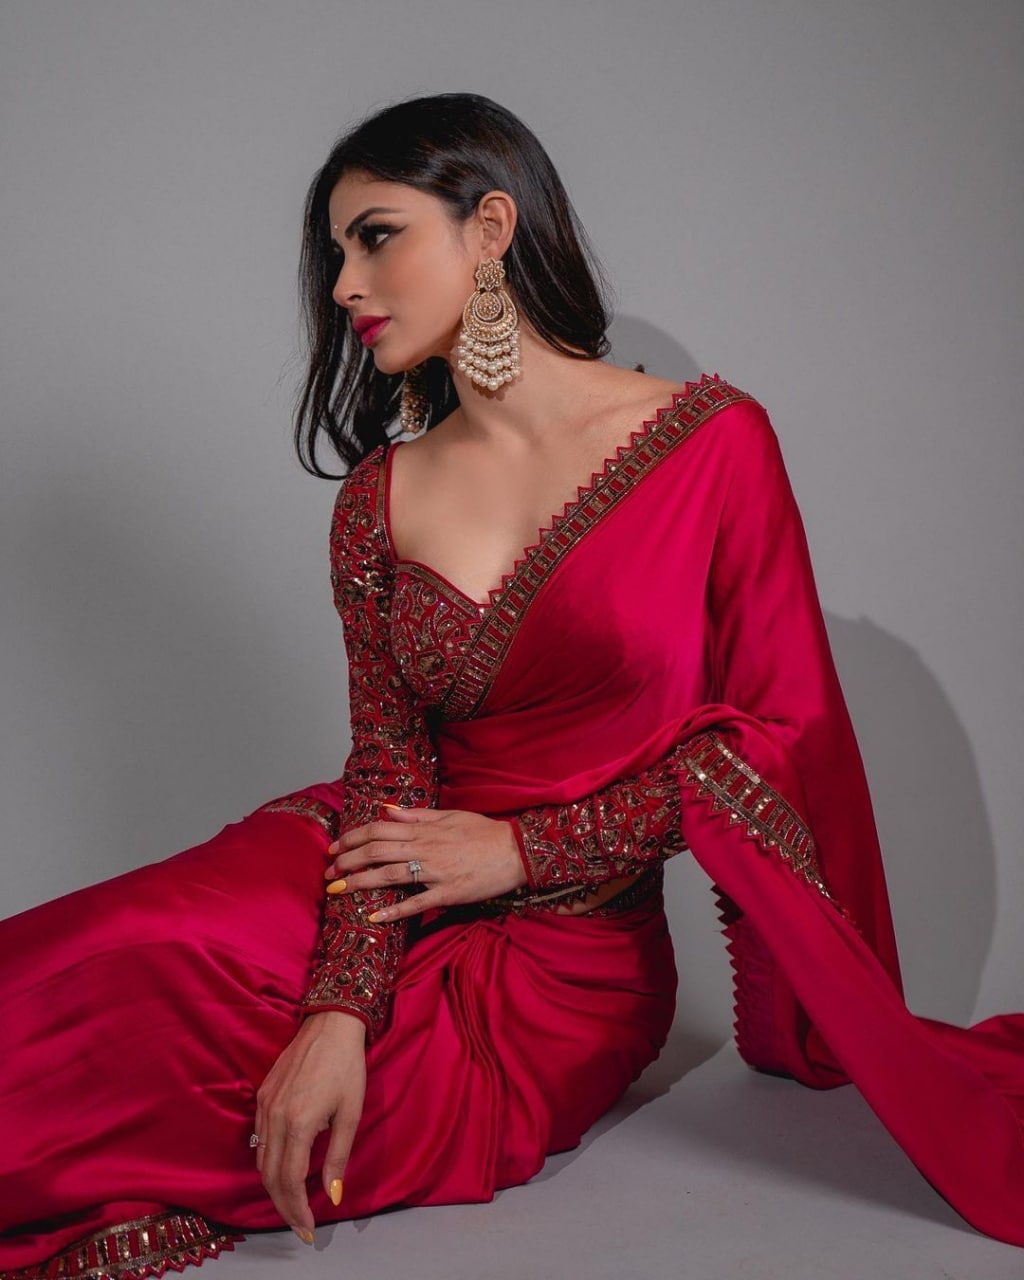 "Elegance in Every Drape: Embrace the Passionate Red of Georgette Sarees"